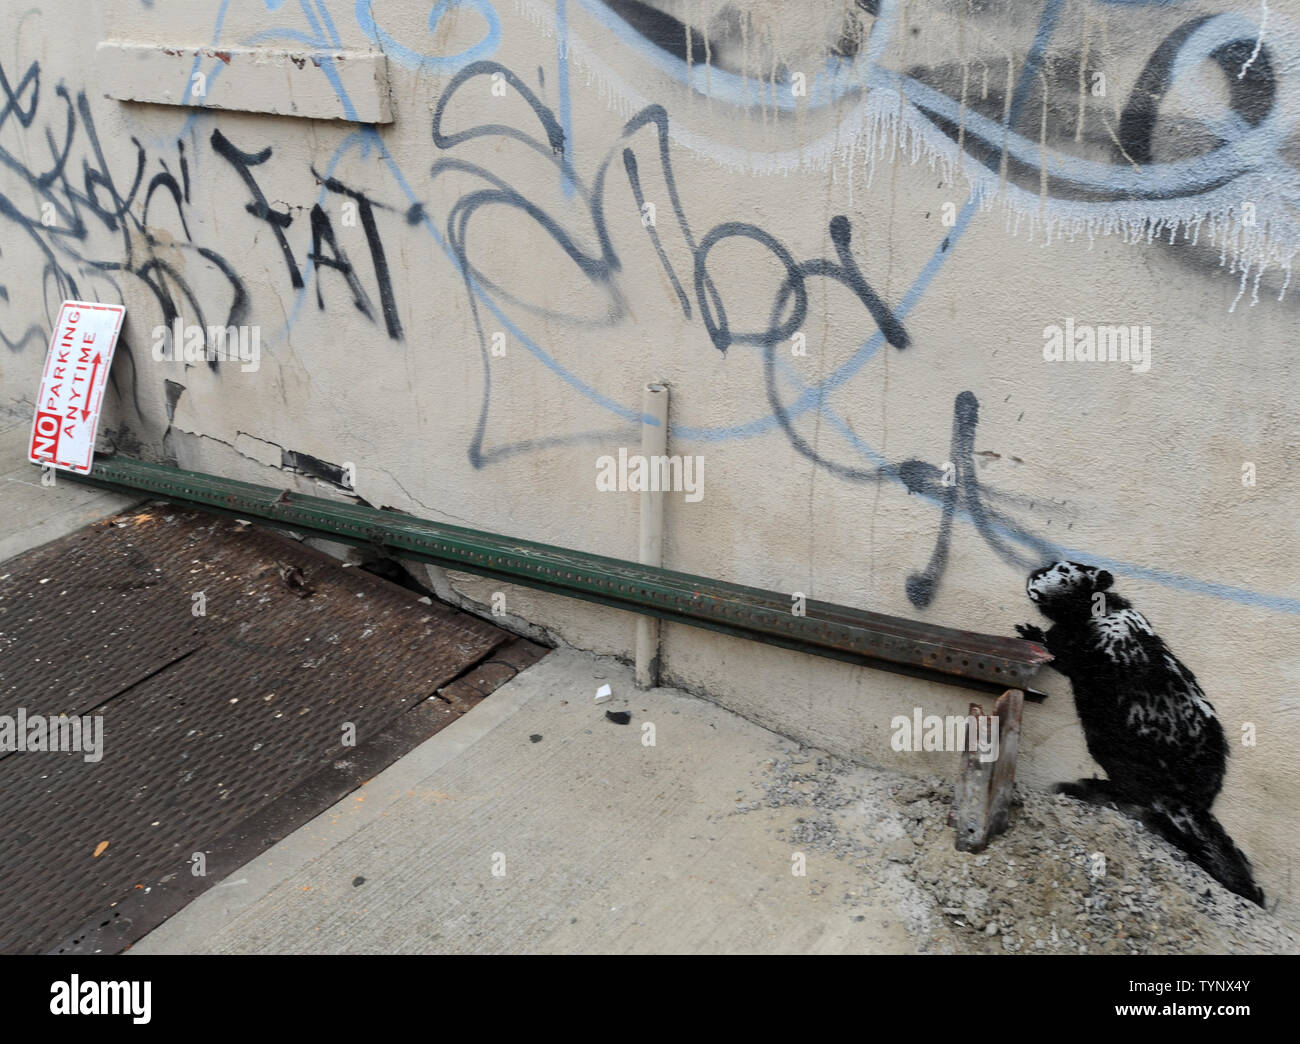 An art work created by British street artist Banksy is seen in New York City on October 10, 2013. Banksy is a pseudonymous England-based graffiti artist, political activist, film director, and painter. His satirical street art and subversive epigrams combine dark humor with graffiti done in a distinctive stenciling technique.    UPI/Dennis Van Tine Stock Photo